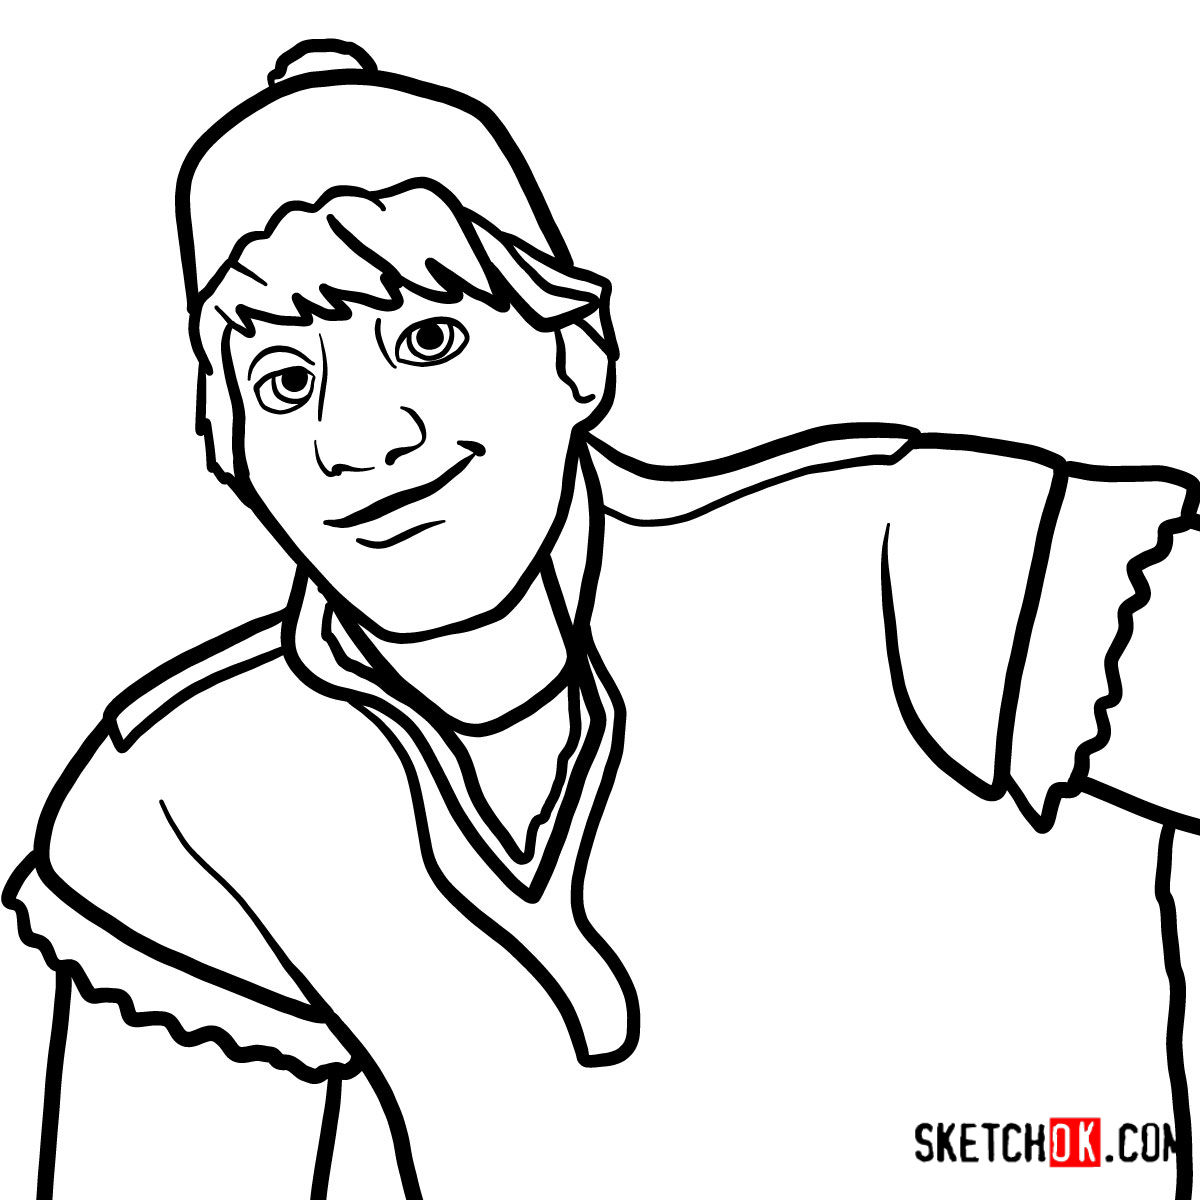 How to draw the face of Kristoff | Frozen